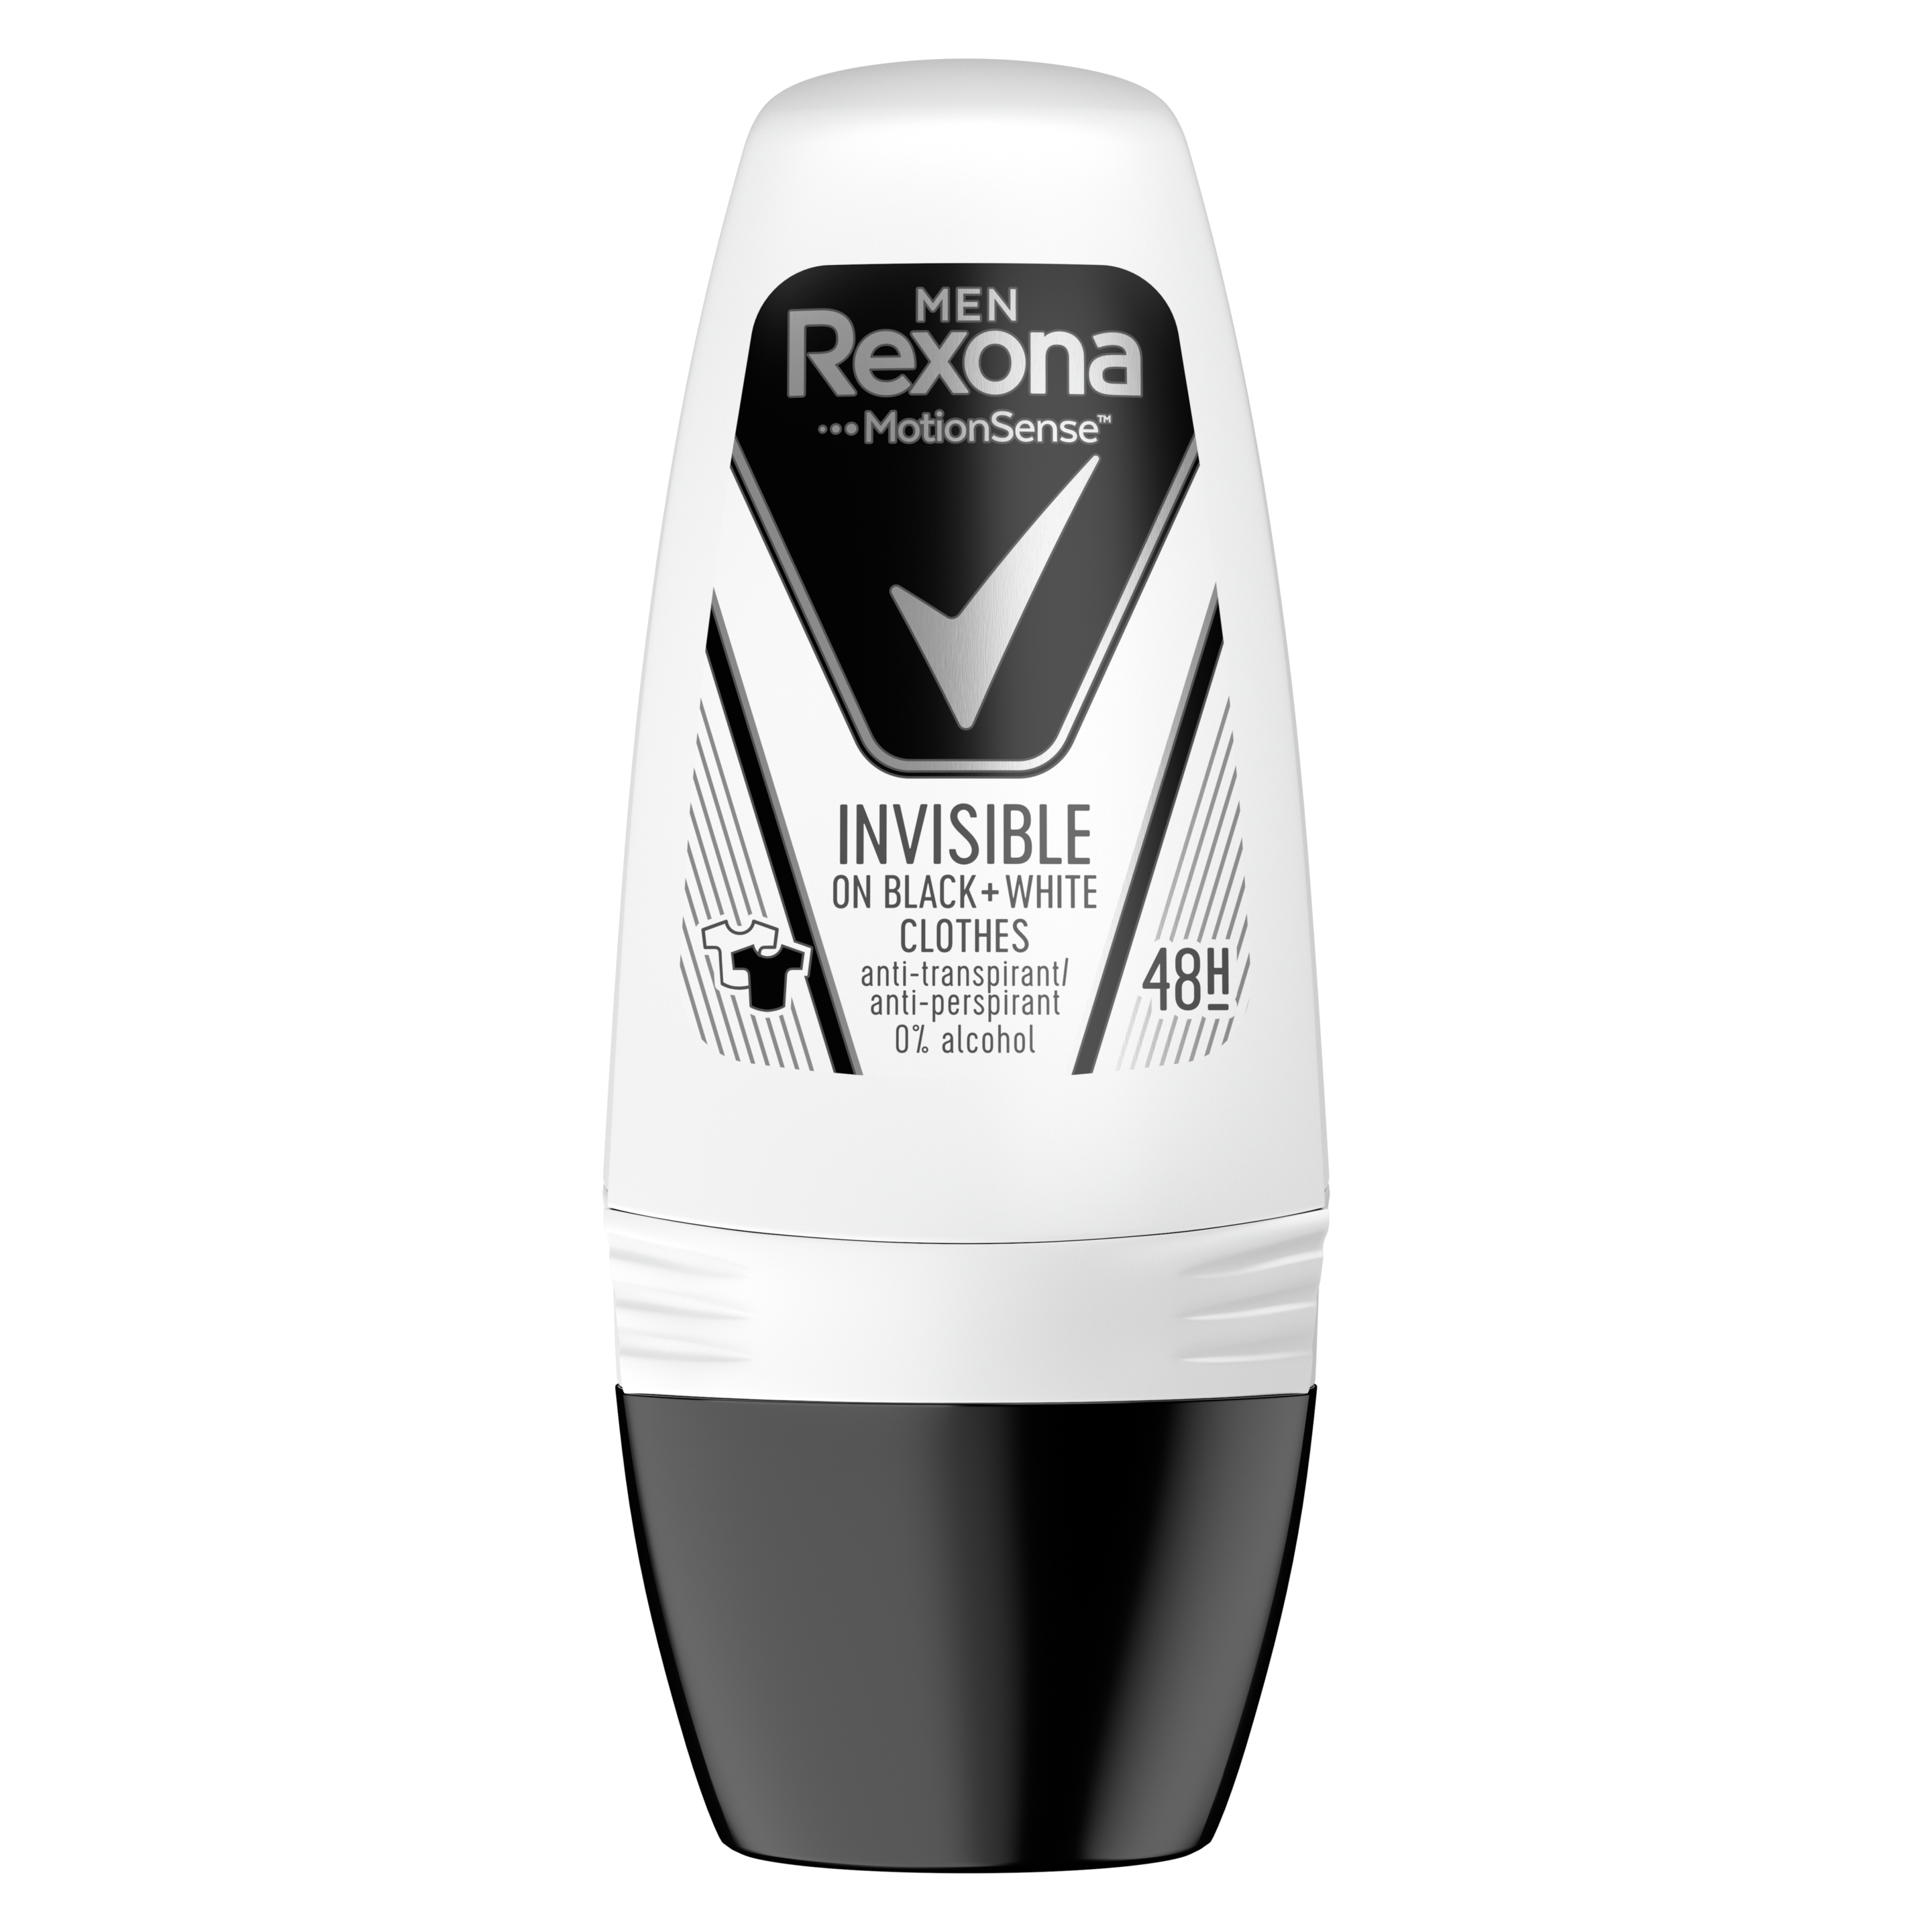 Rexona for Men Invisible on Black + White Clothes roll-on